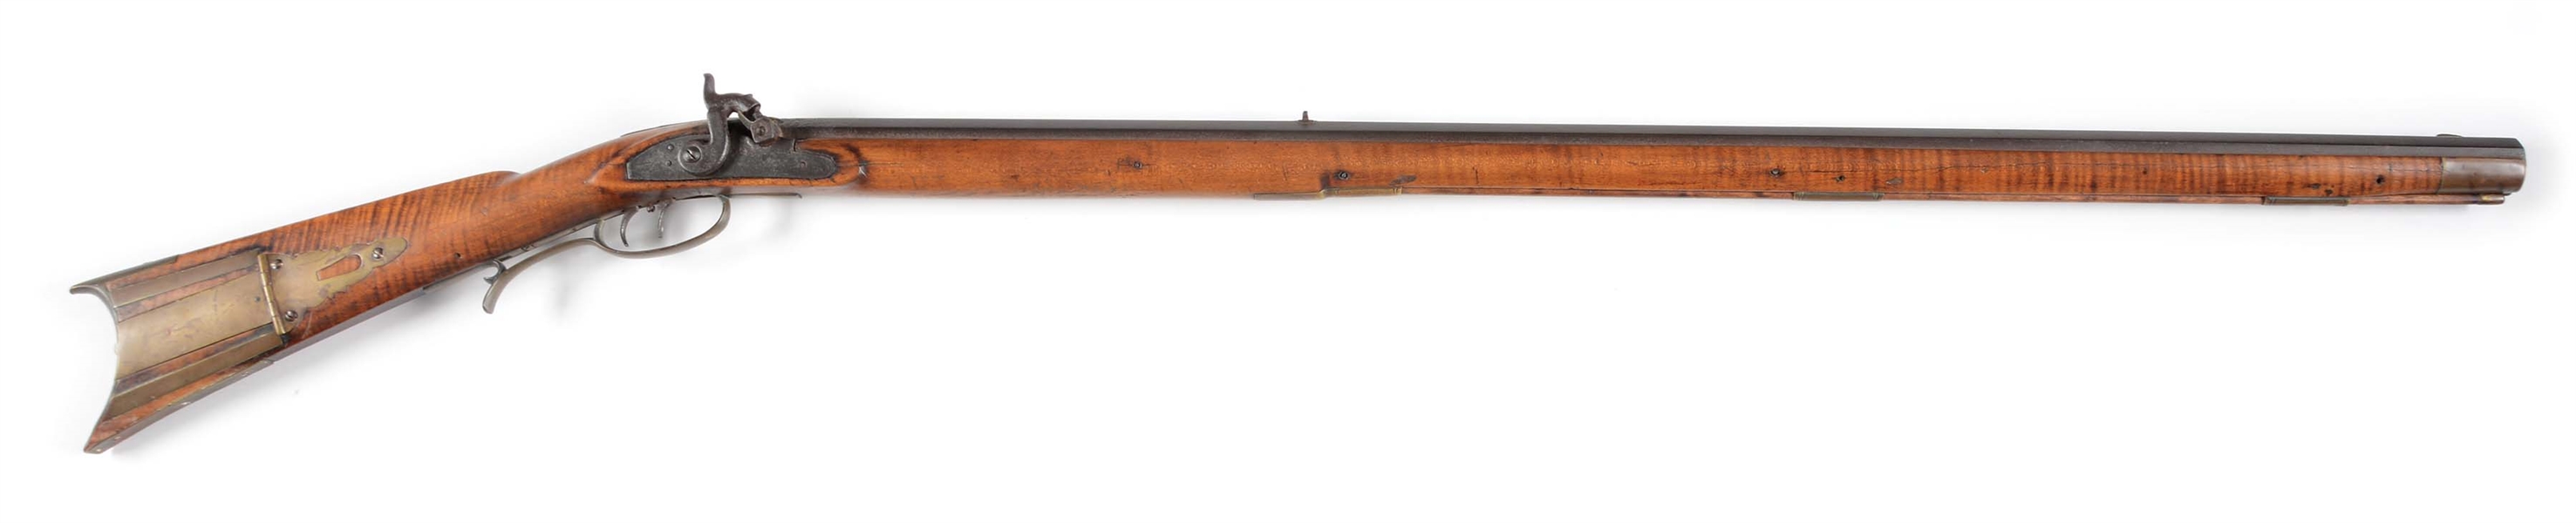 (A) SOWERS & SMITH PERCUSSION KENTUCKY RIFLE.